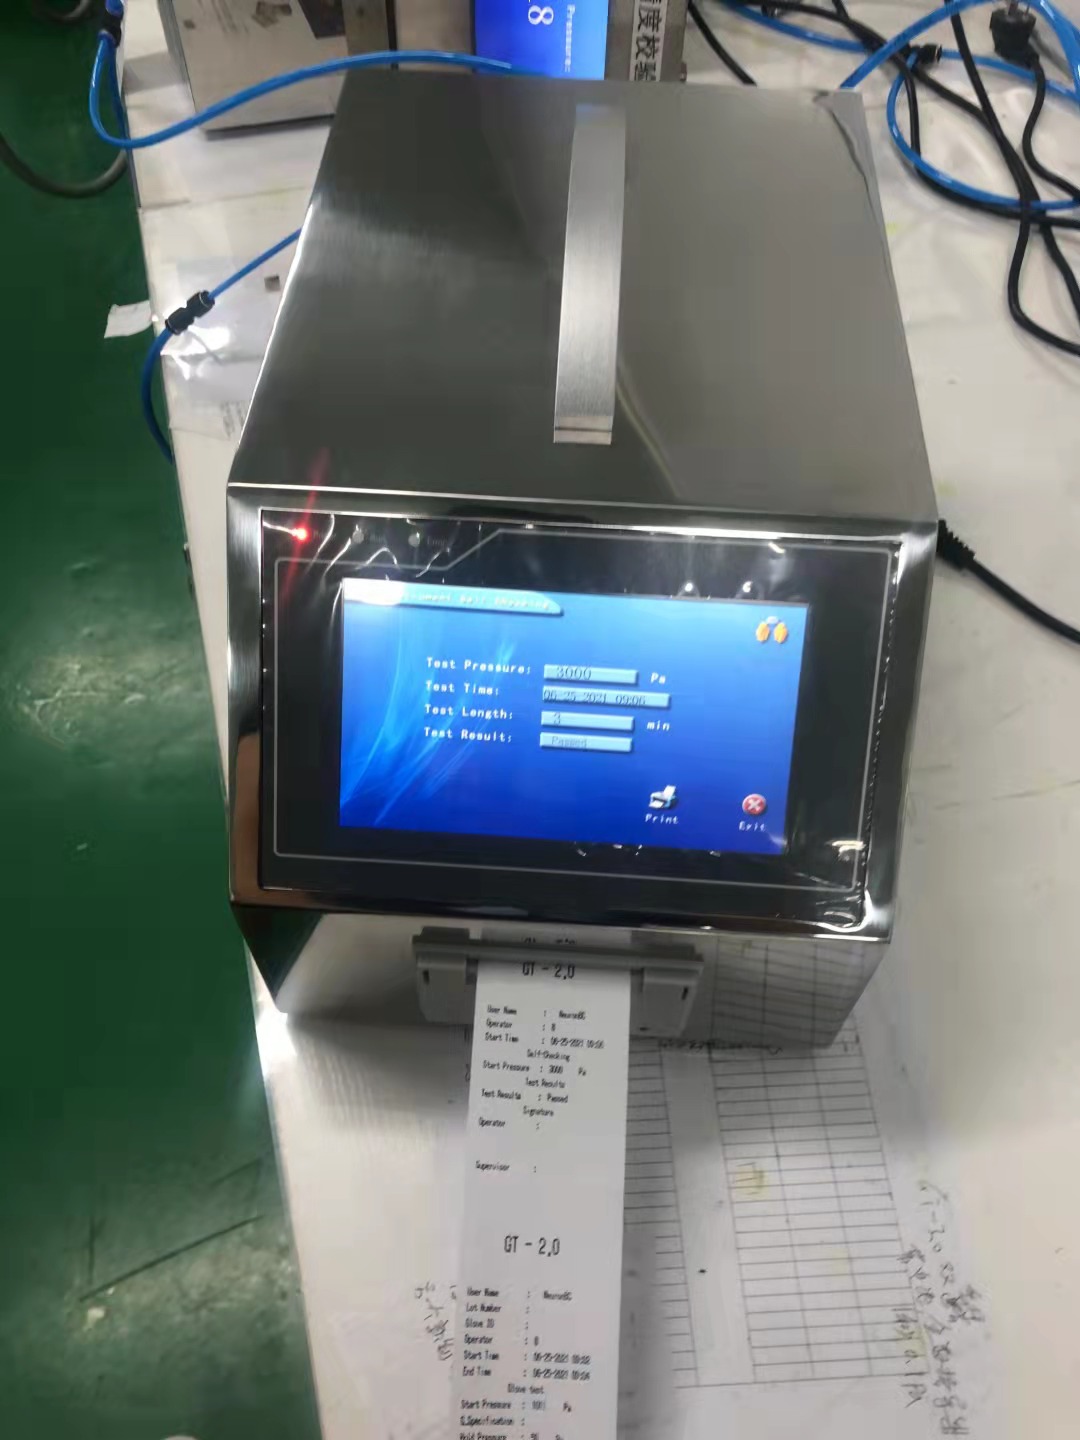 NADE GT-2.0-1 Electronic Offline Glove Integrity Tester for Pharmaceutical Laboratory with fast detection speed,high precision